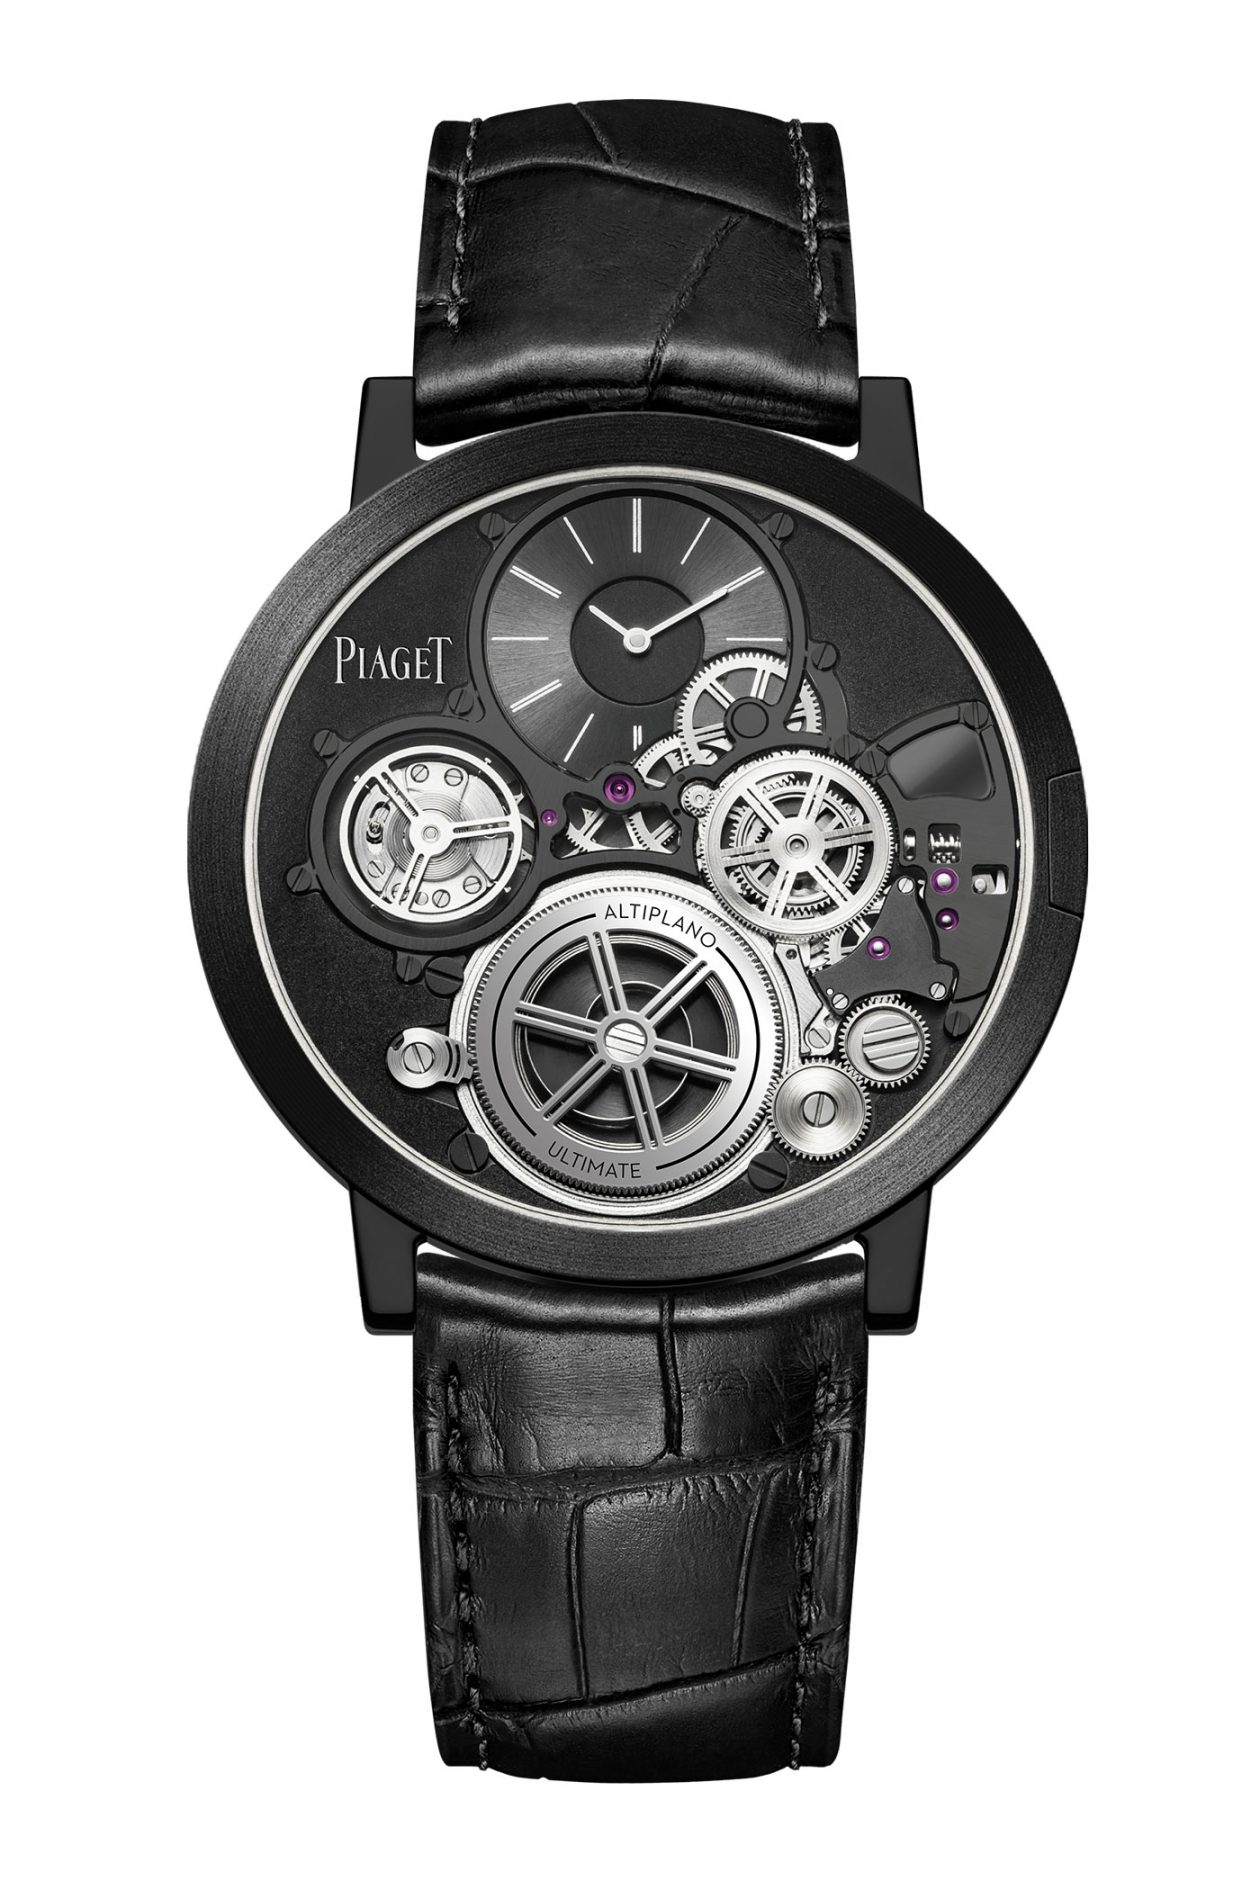 Piaget Altiplano Ultimate Concept